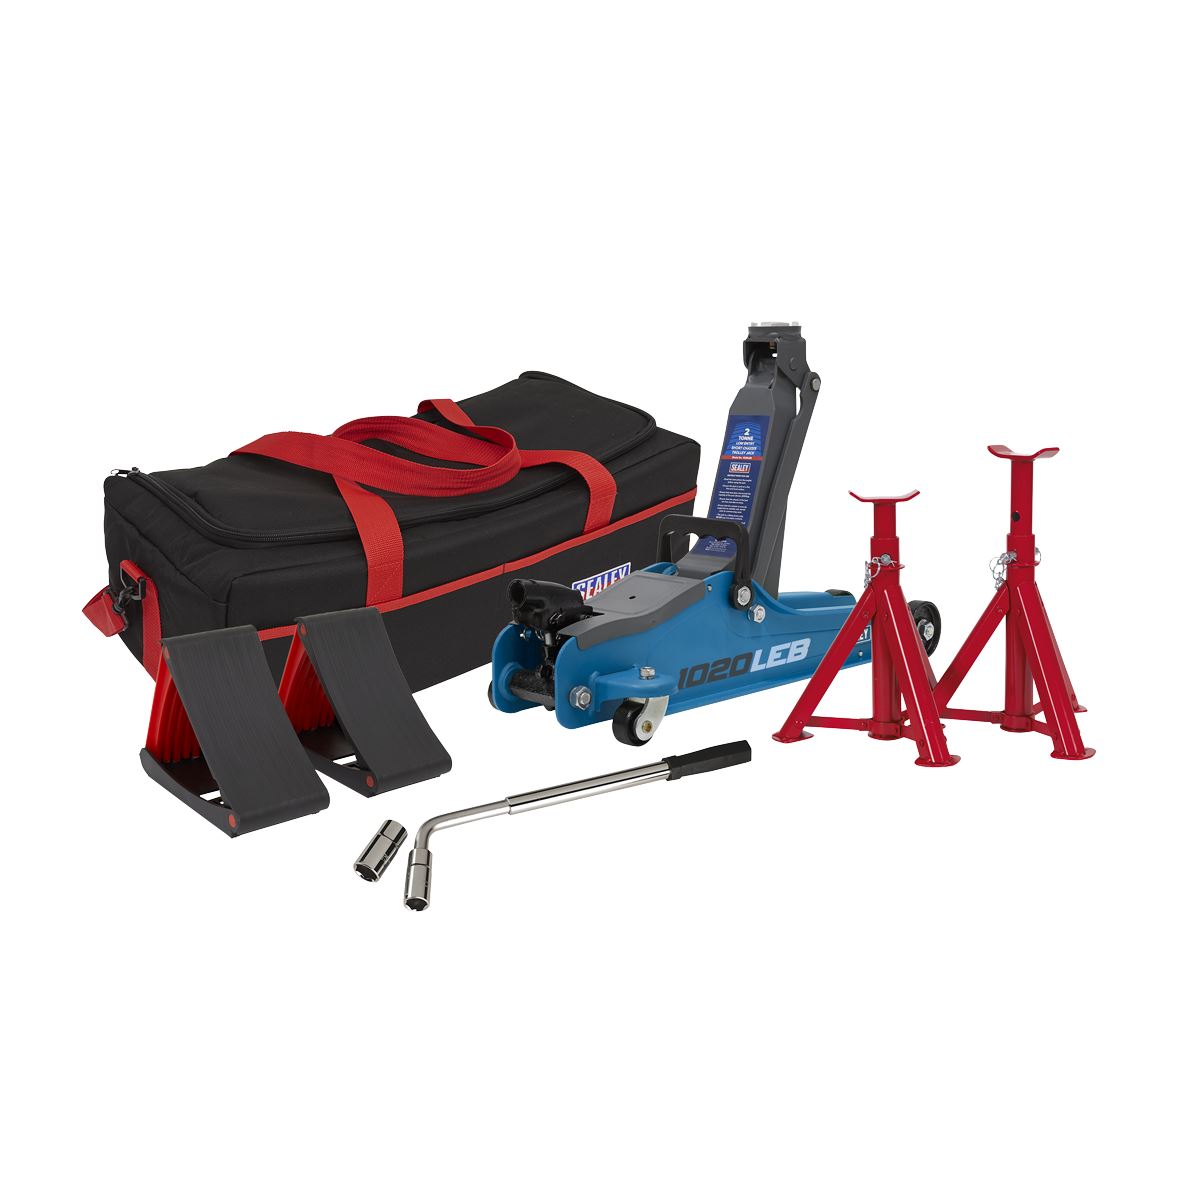 Sealey Low Entry Short Chassis Trolley Jack & Accessories Bag Combo, 2 Tonne - Blue